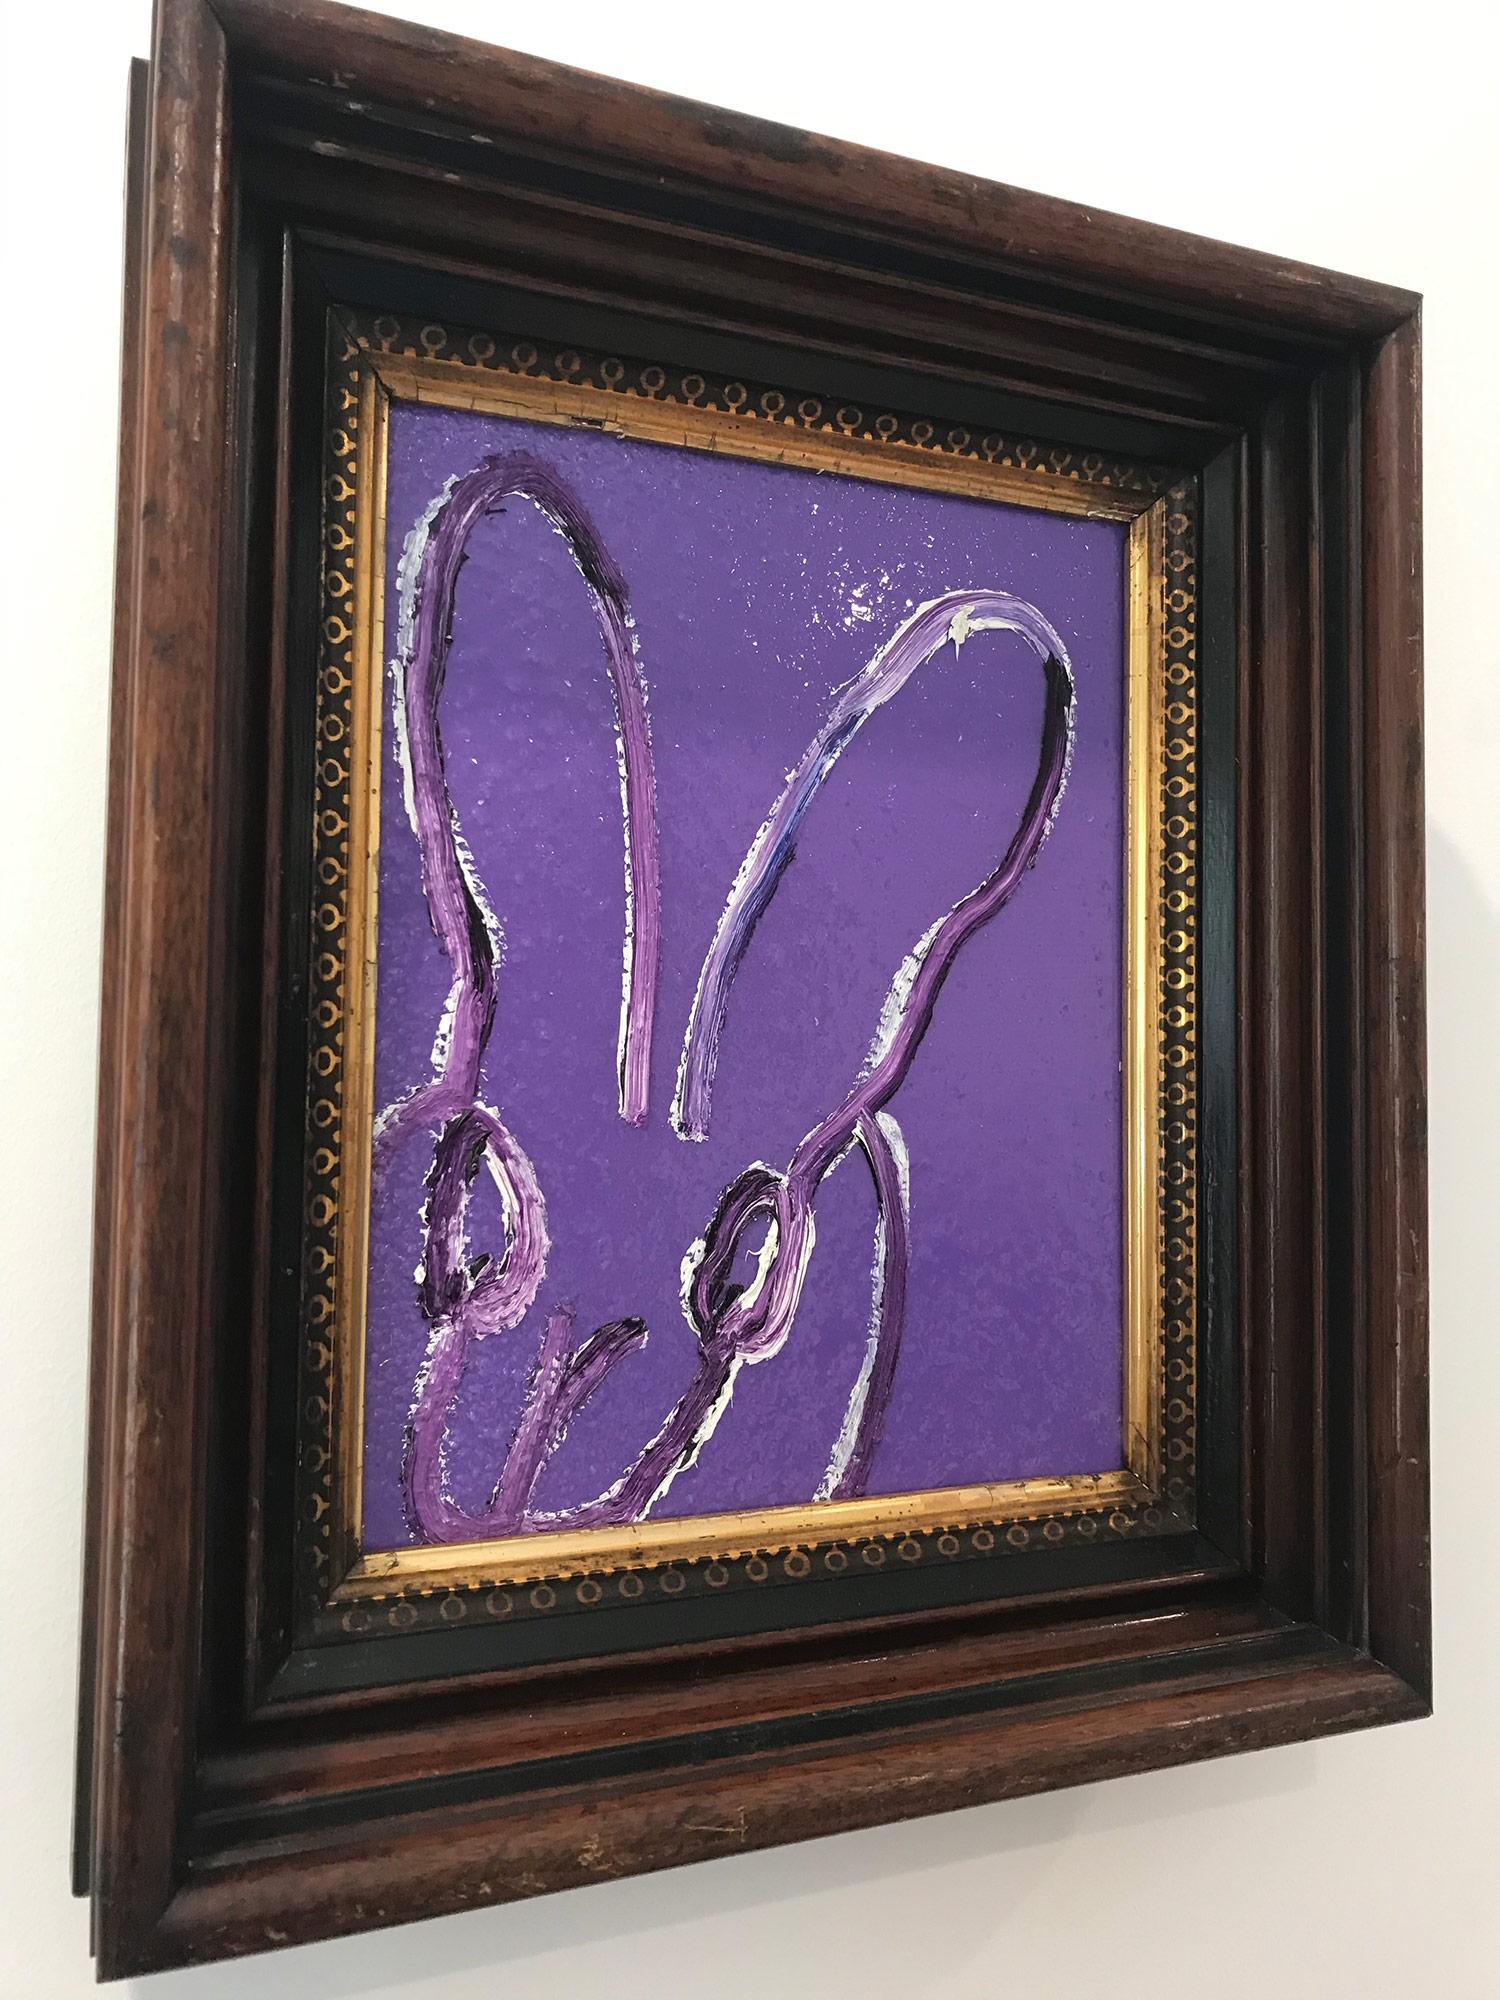 A wonderful composition of one of Slonem's most iconic subjects, Bunnies. This piece depicts a gestural figure of a white bunny on a Purple background with thick use of paint and diamond dust. It is housed in a wonderful antique frame. Inspired by